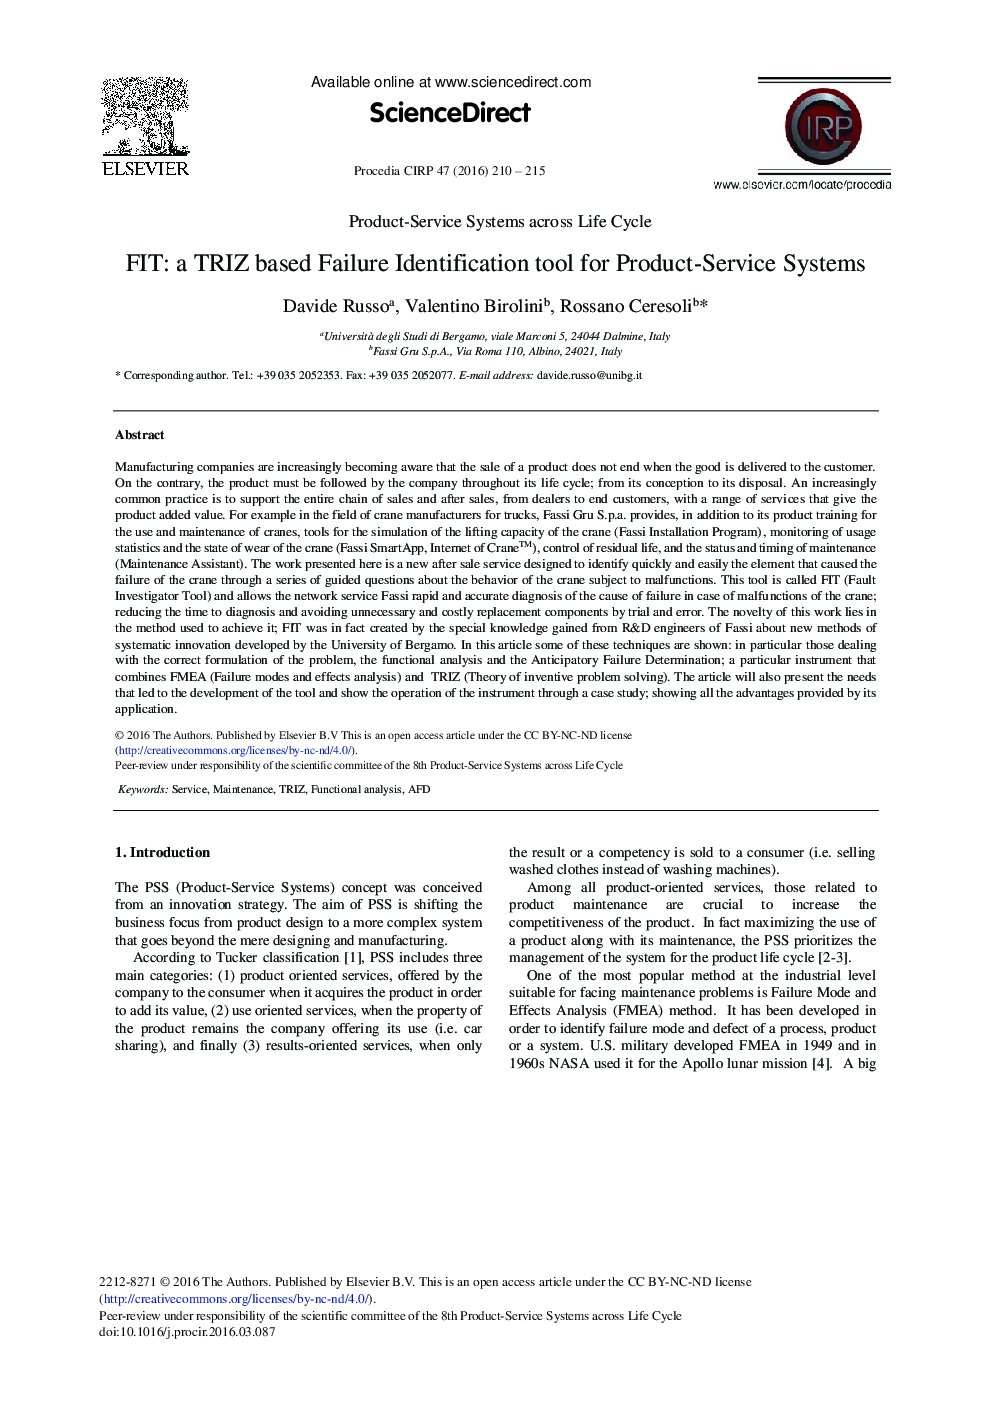 FIT: A TRIZ Based Failure Identification Tool for Product-Service Systems 